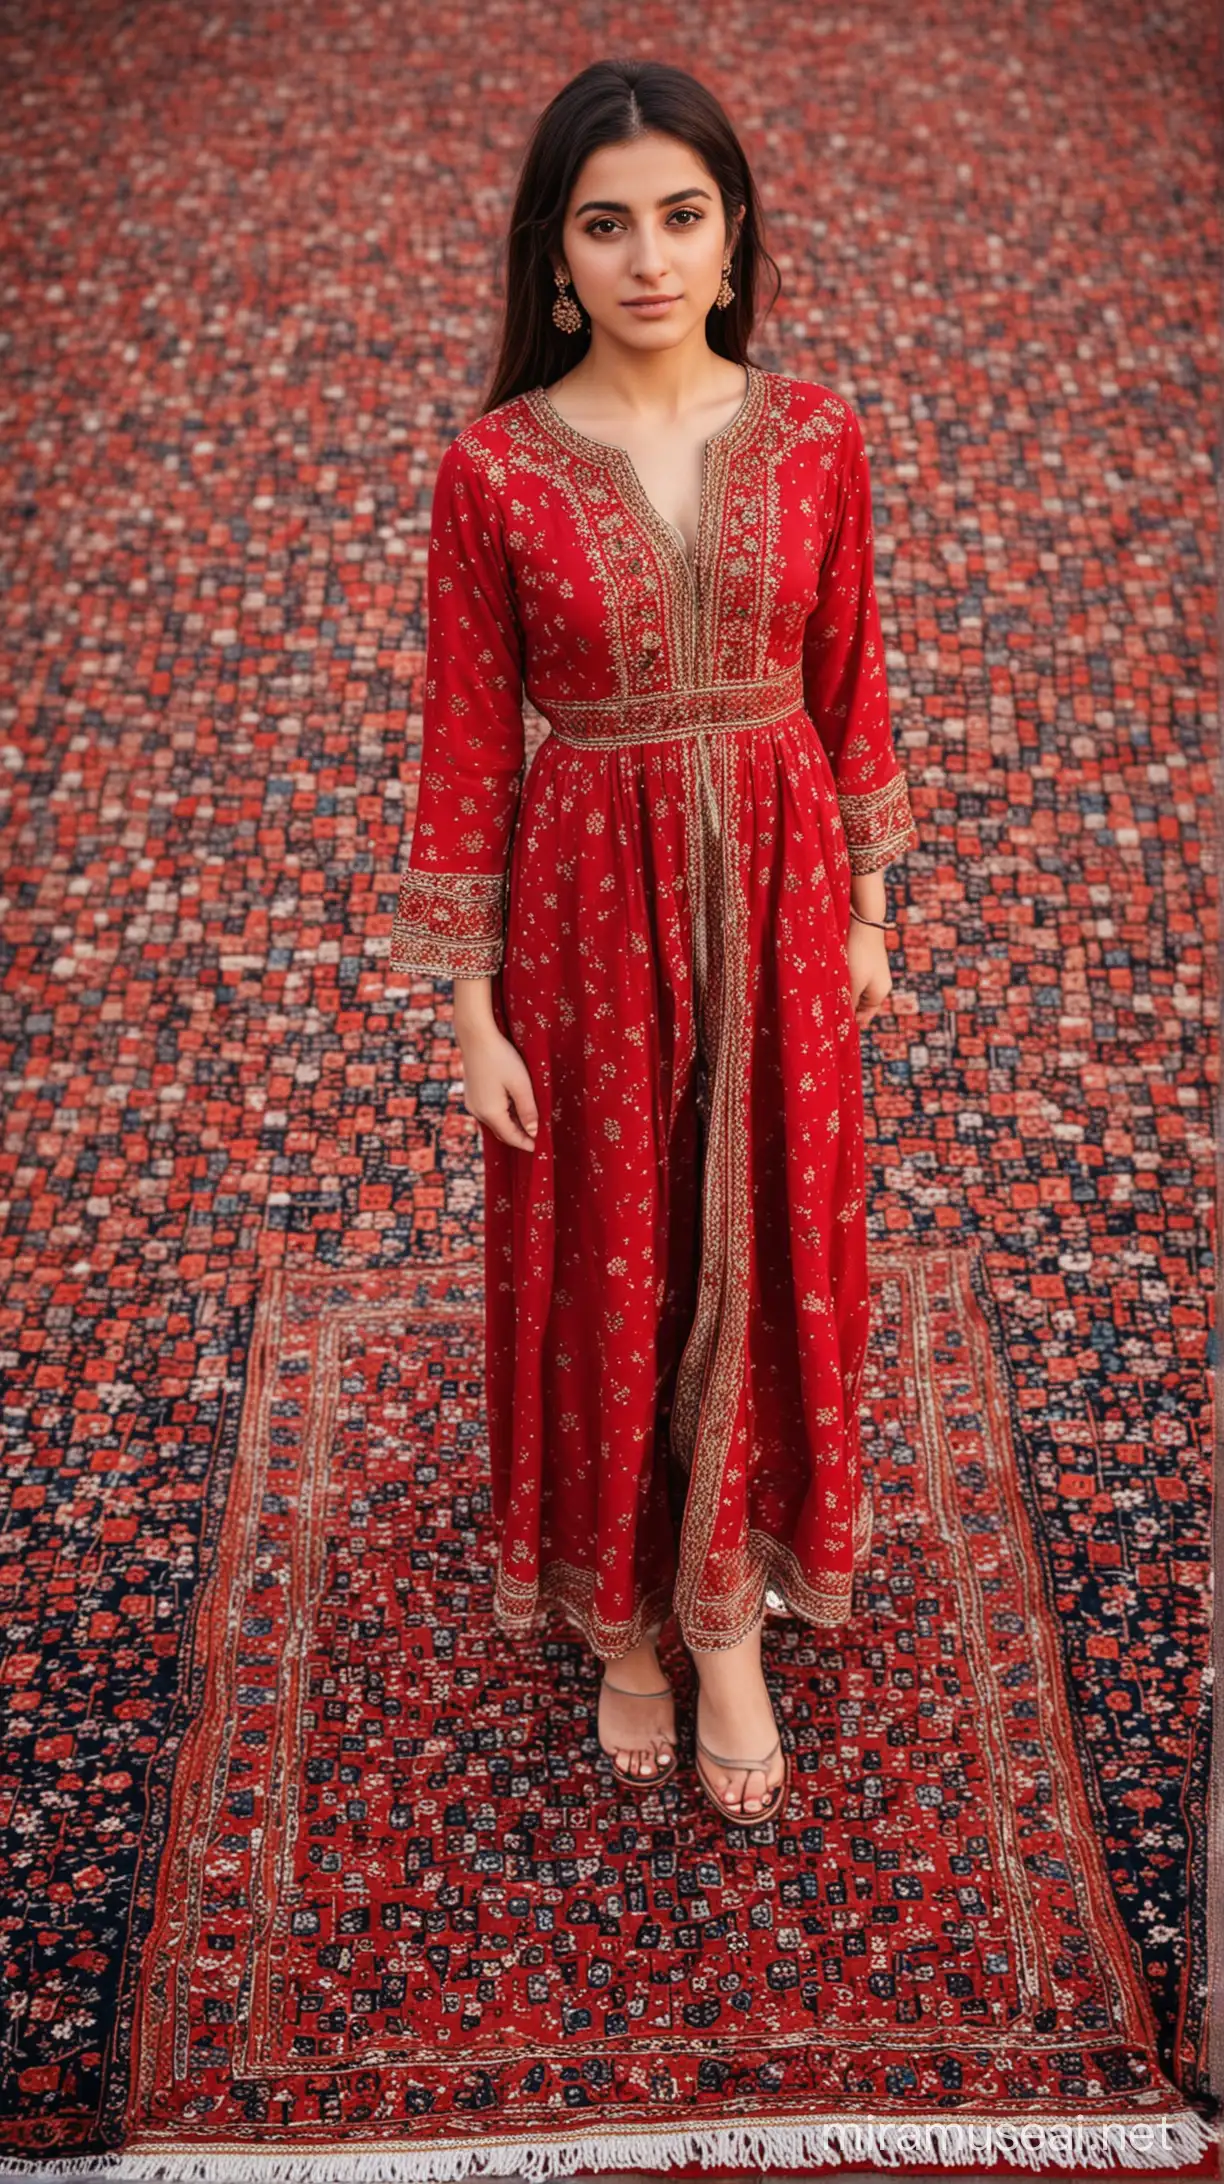 Iranian Girl in Traditional Iranian Dress on Vibrant Red Carpet